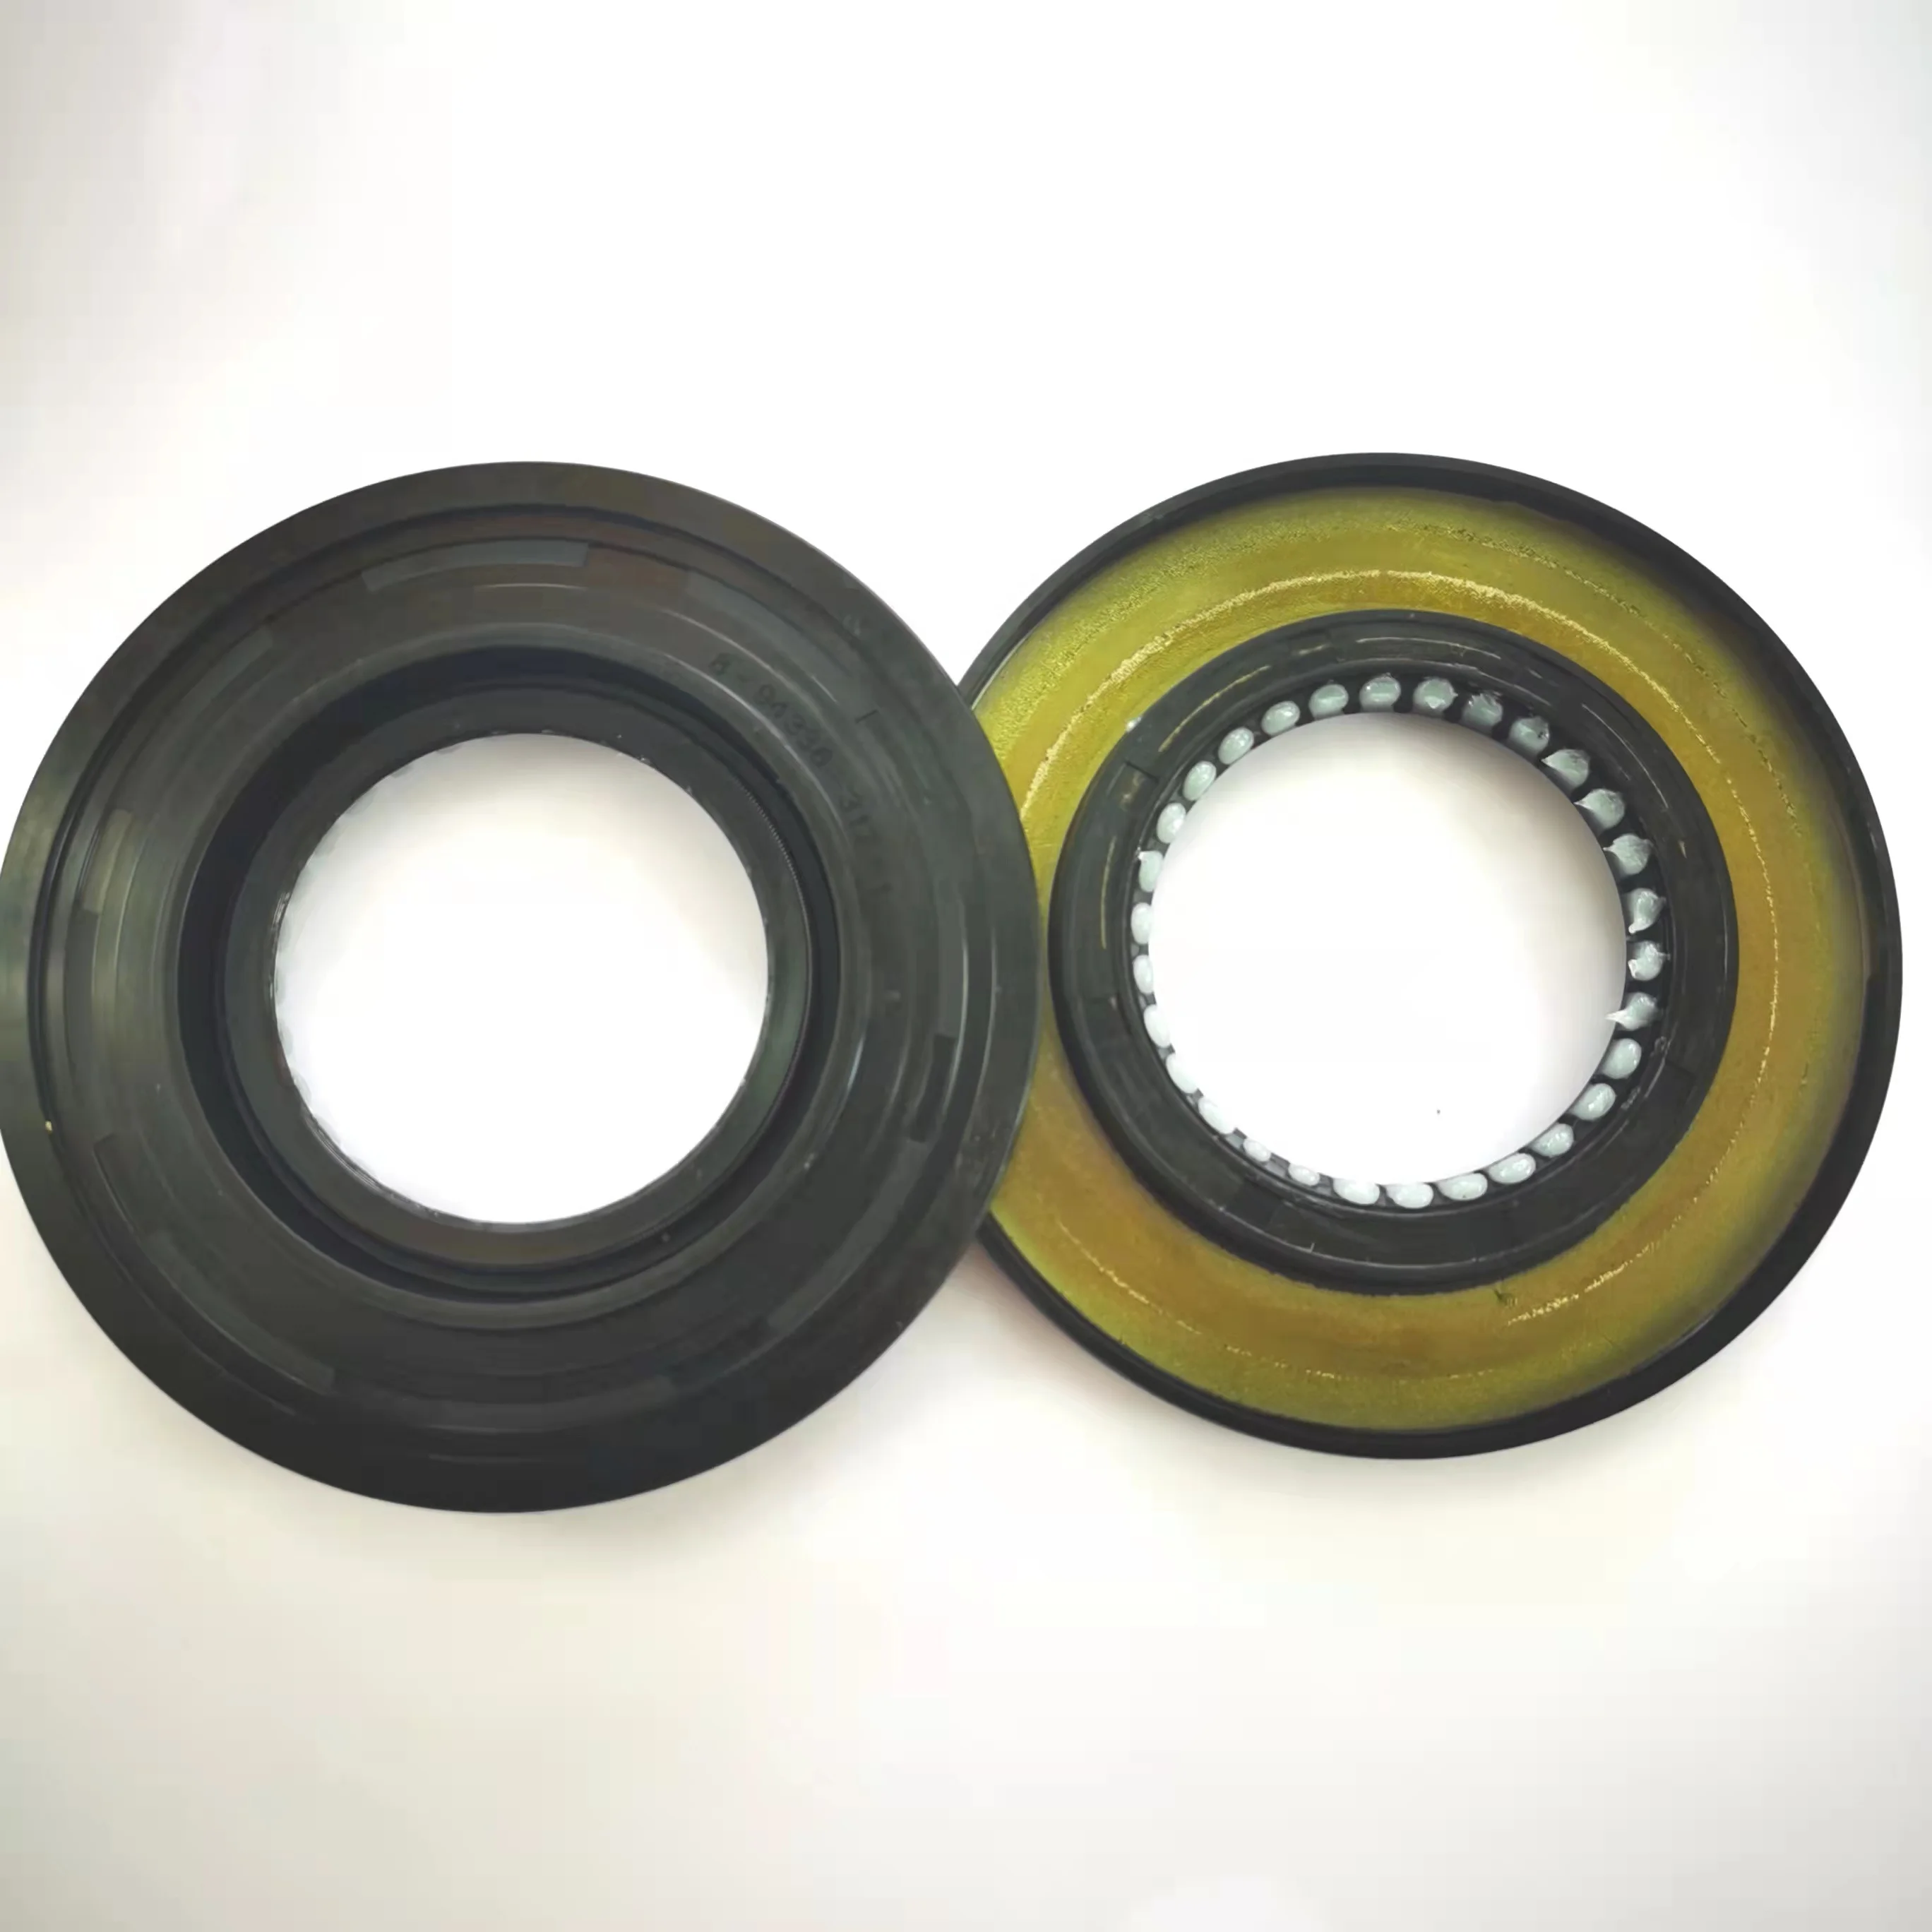 XTSEAO 894336317 49*100*8/10  oil  seal for Front Axle Shaft Oil Seal  NBR FPM nylon oil seal